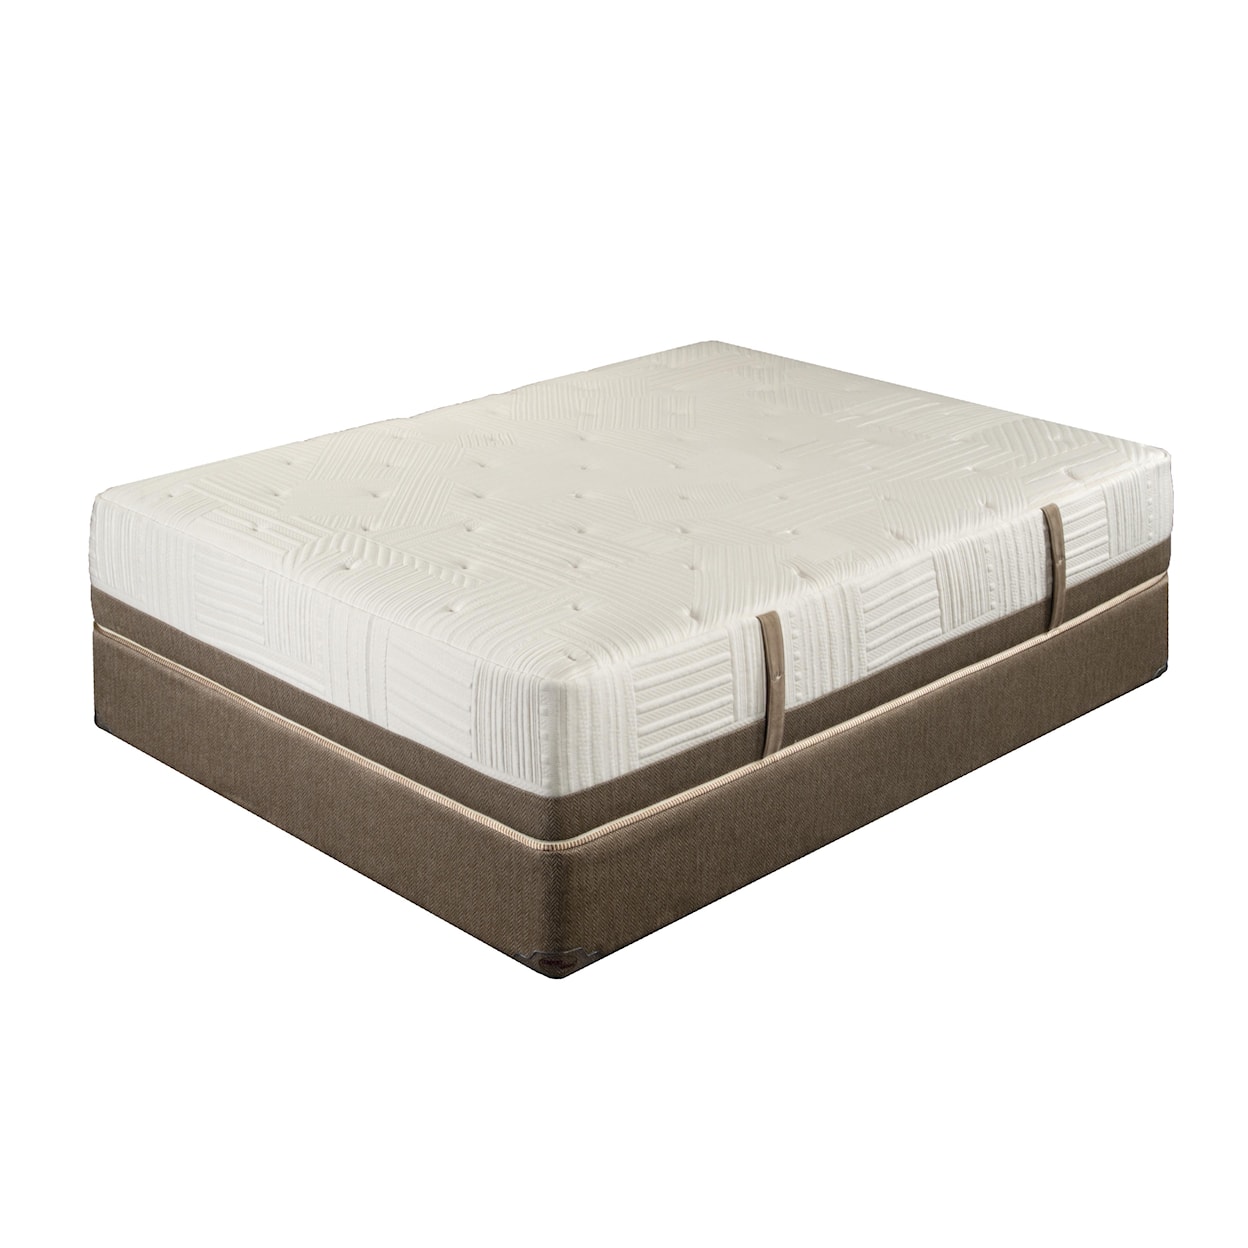 King Koil Extended Life 3100 King Luxury Firm Mattress